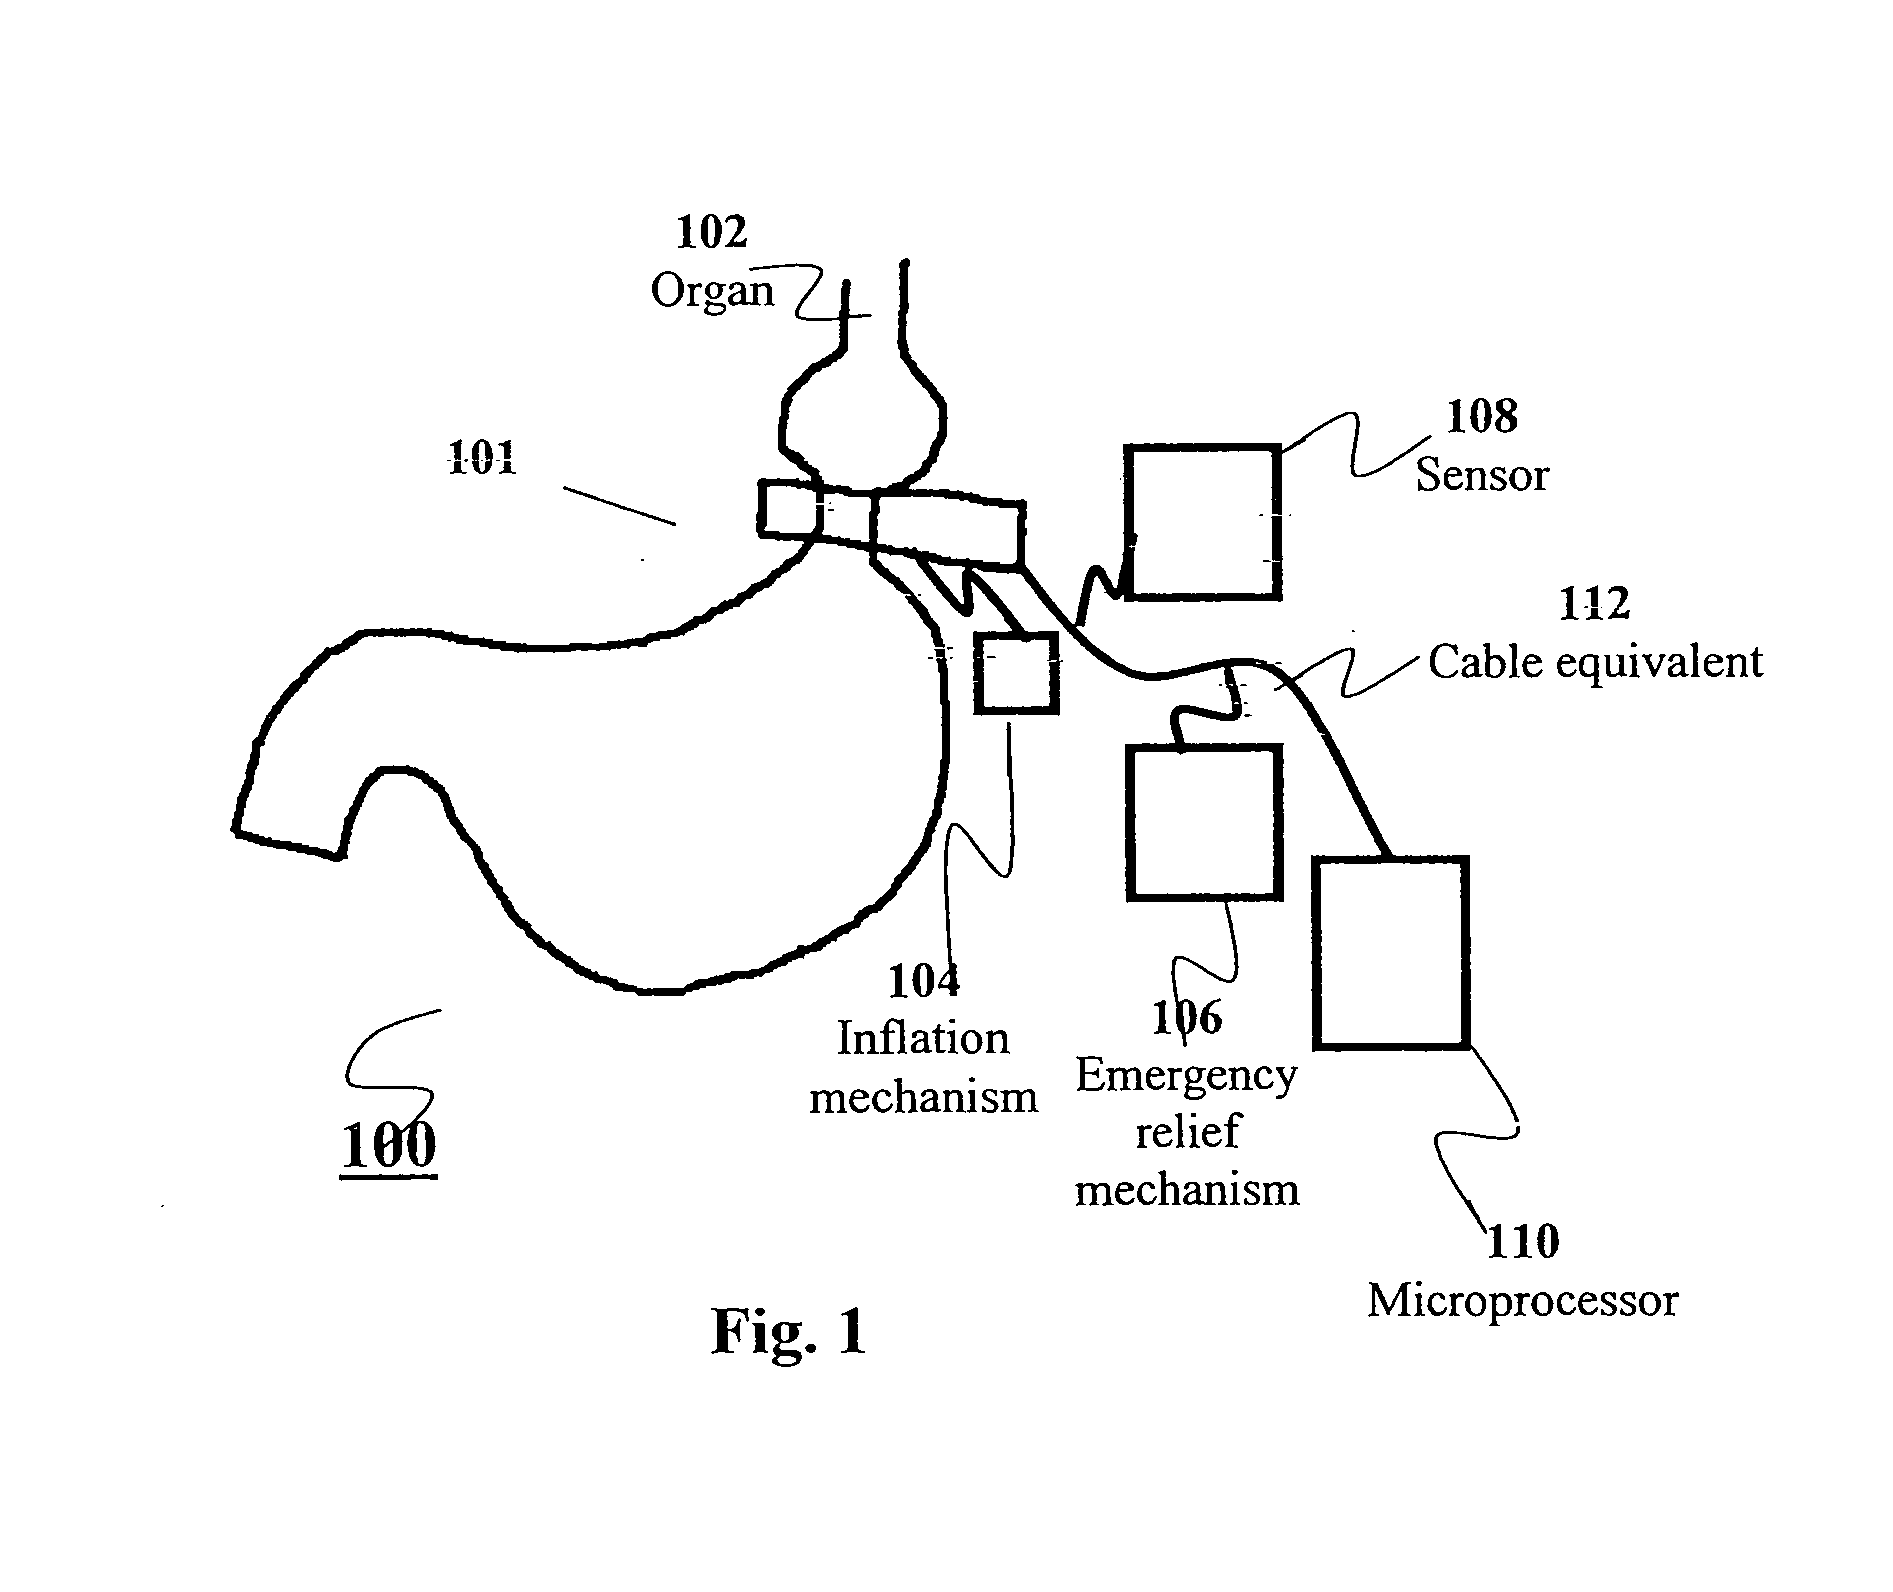 Apparatus and methods for corrective guidance of eating behavior after weight loss surgery